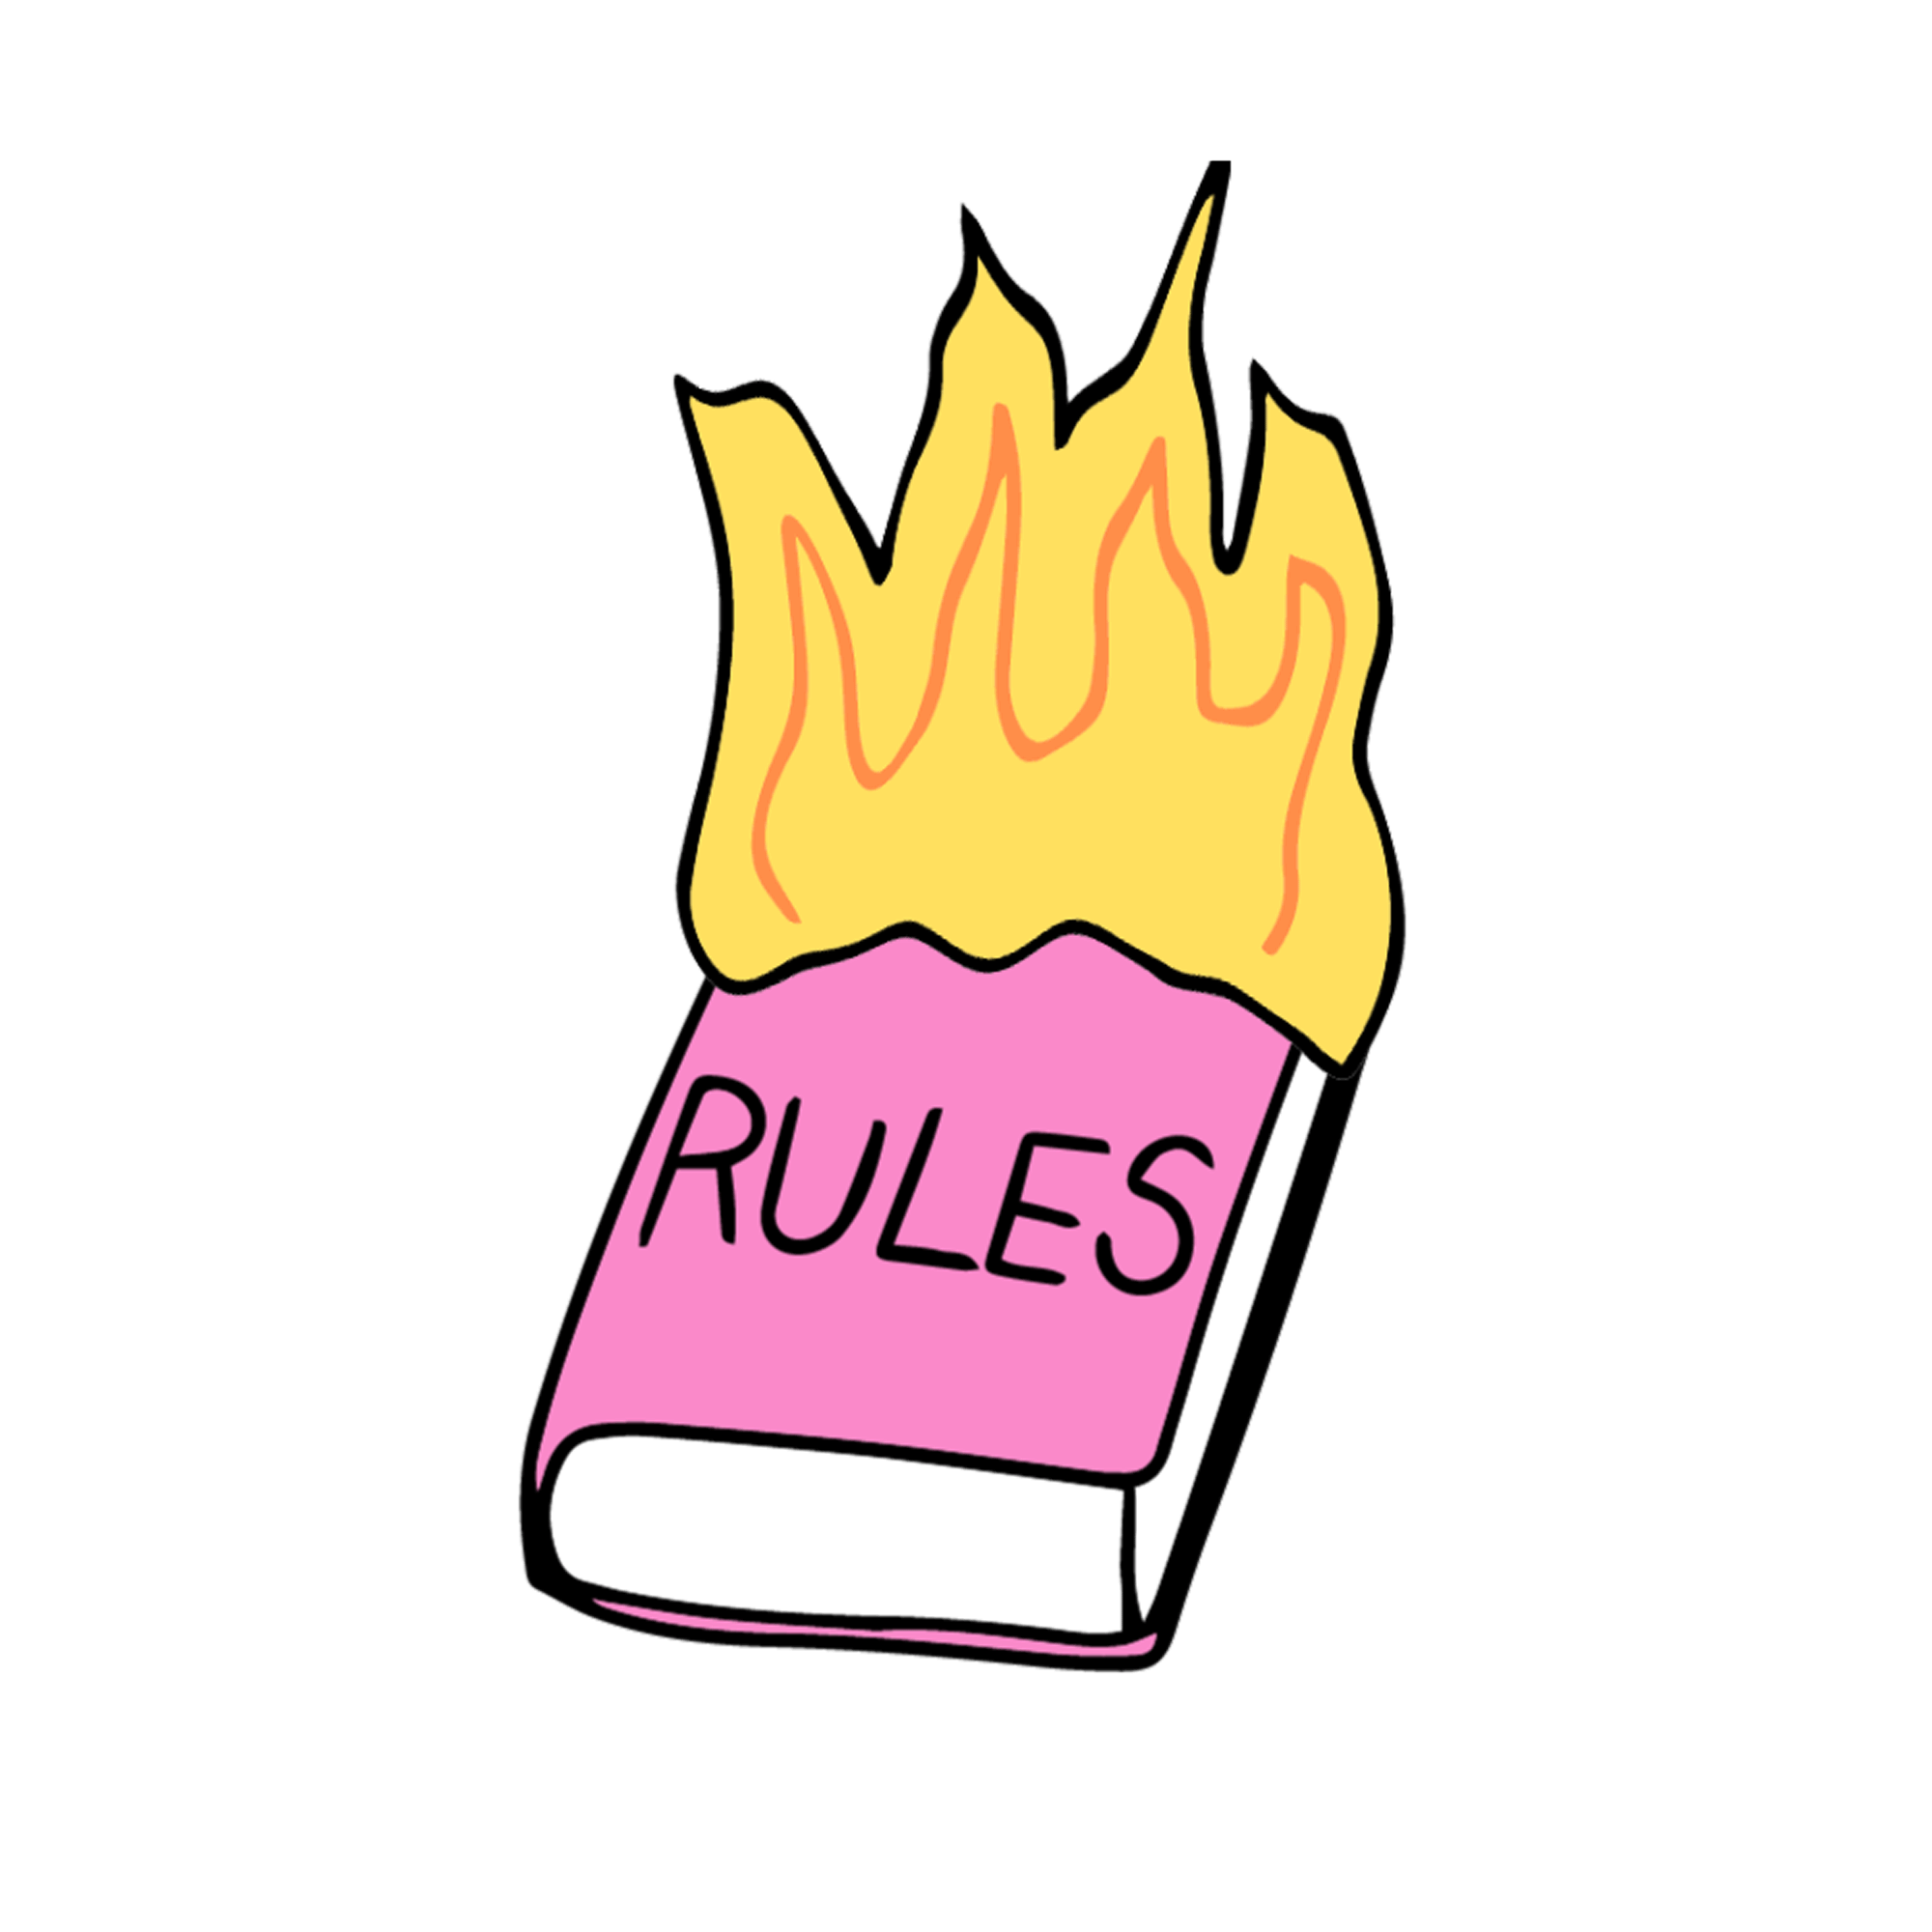 Picture of a rulebook on fire